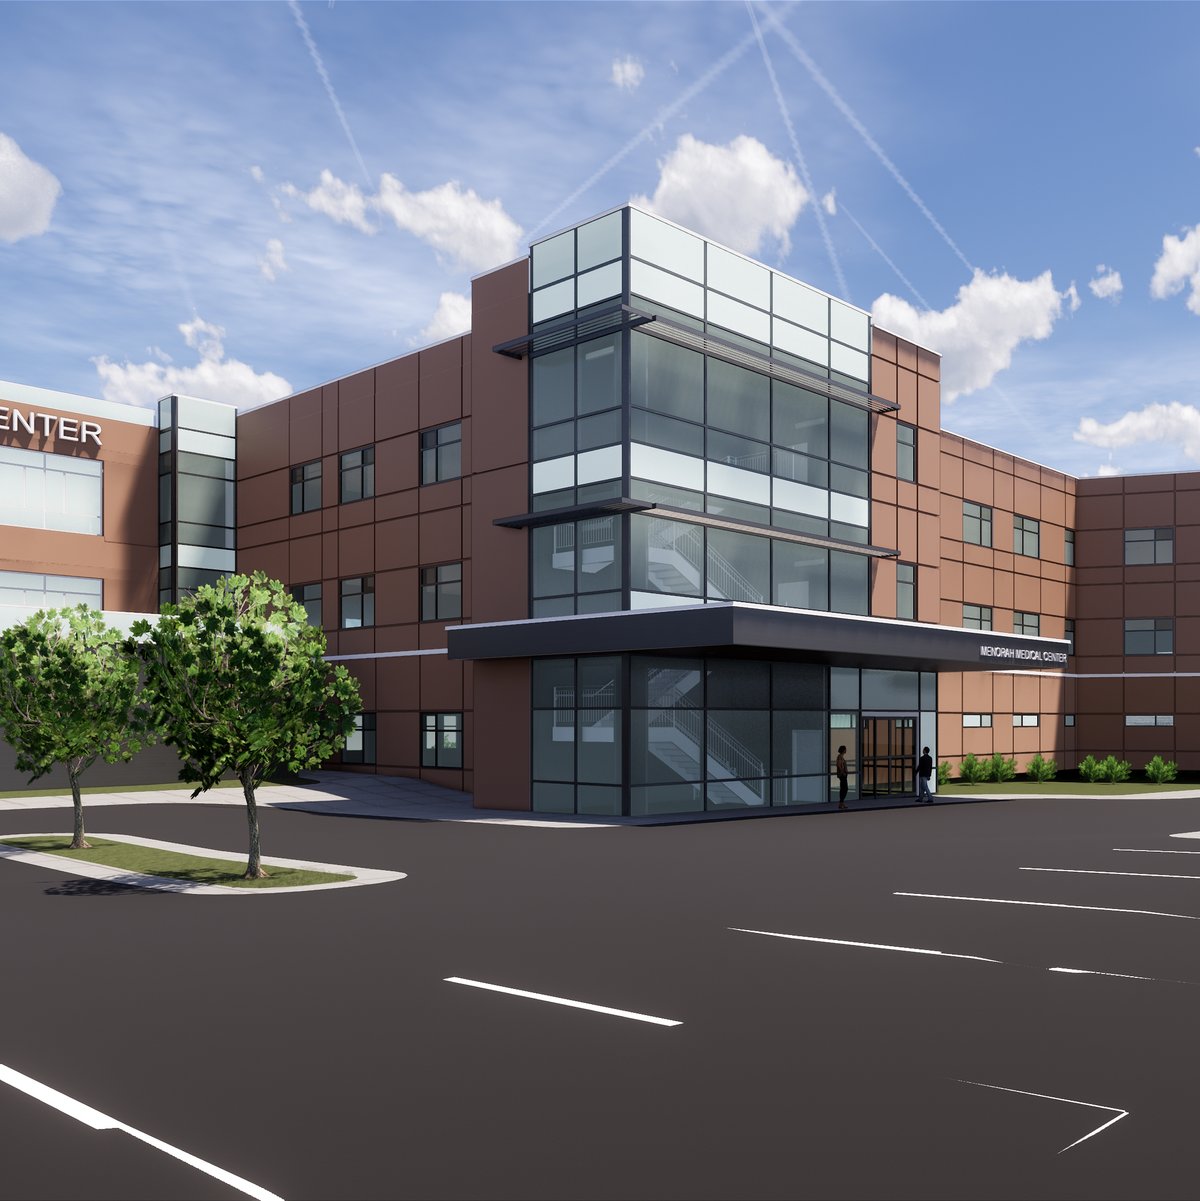 Overland Park Regional Medical Center nationally recognized with